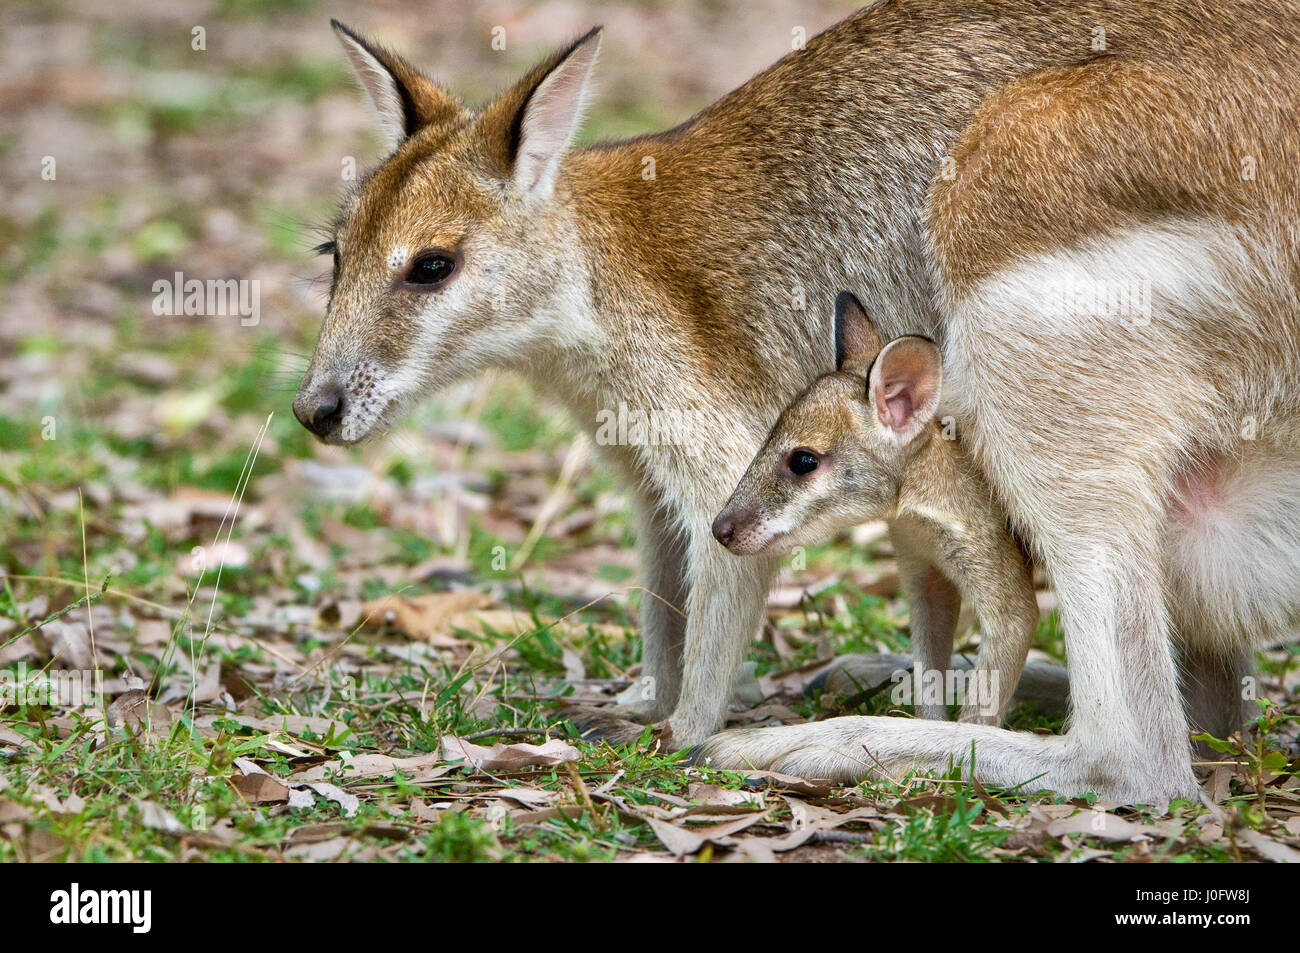 Agile Wallaby with joey looking out of the pouch. Stock Photo